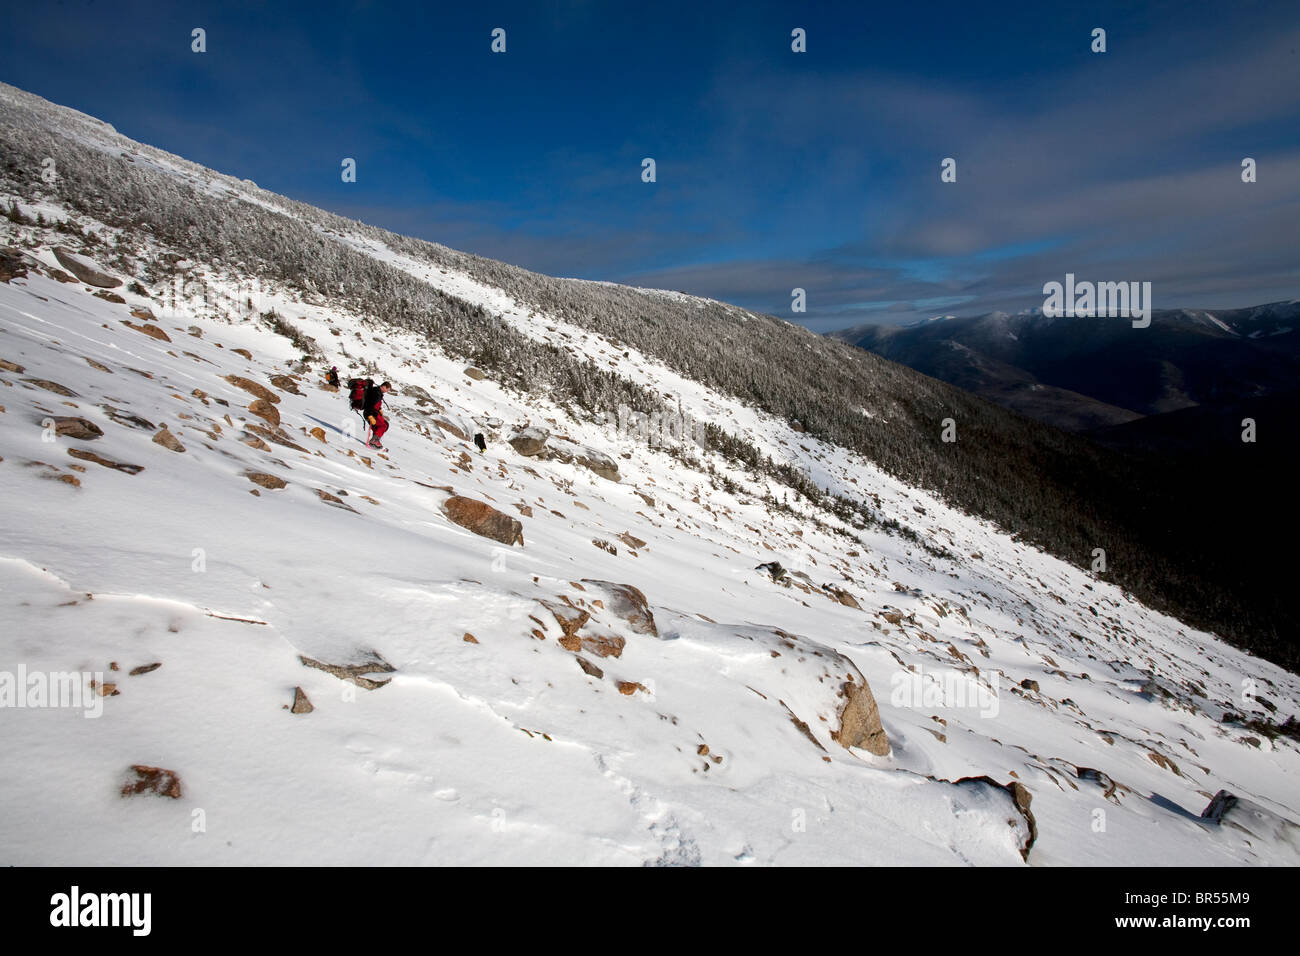 A hiker scours the side of Mount Lafayette during a training search and rescue mission. Stock Photo